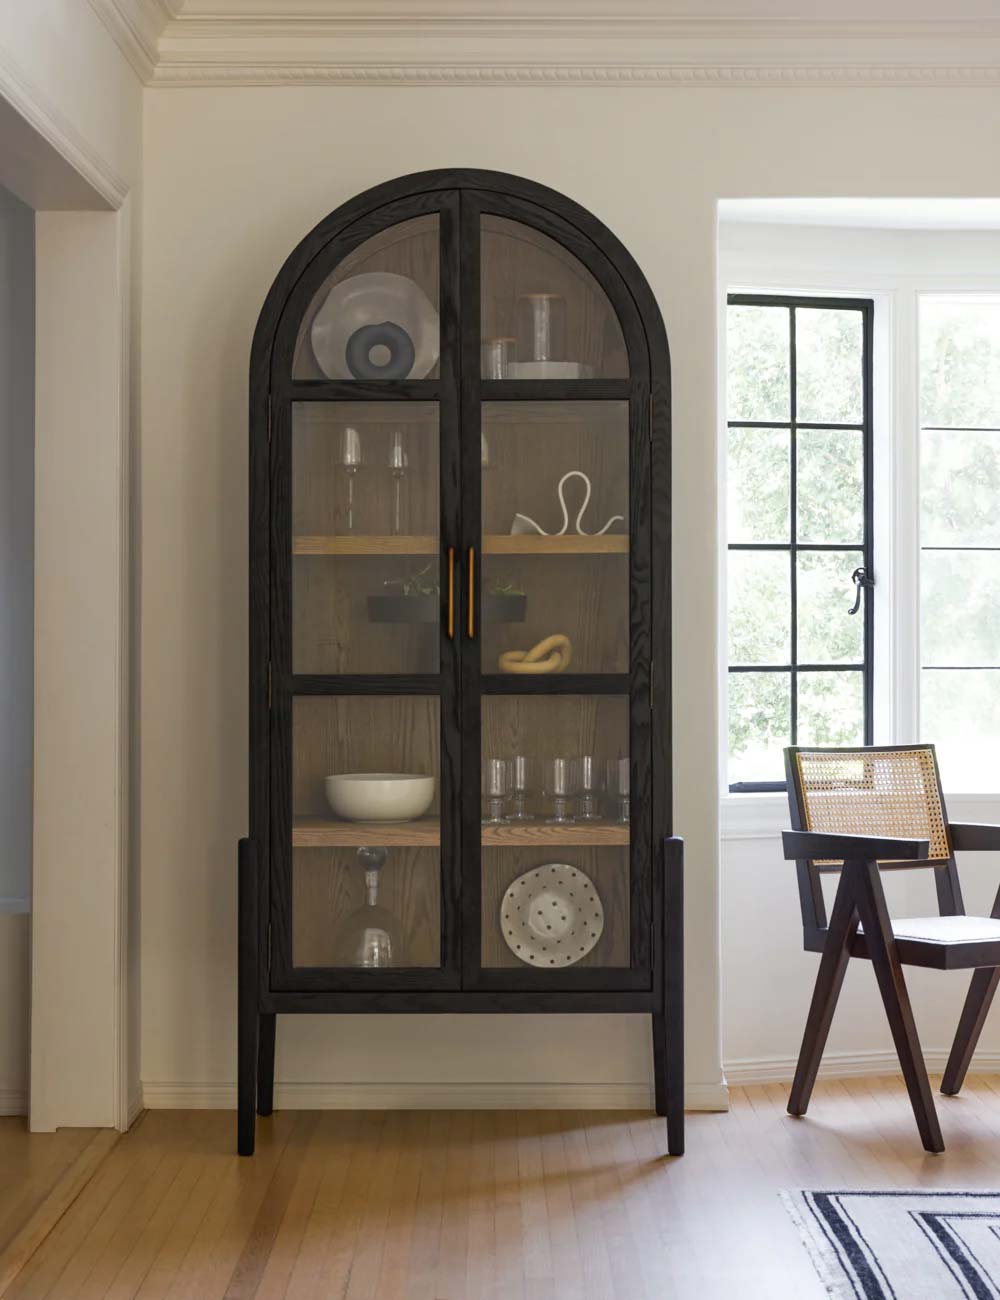 Apolline Curio Cabinet - black arched cabinet made from solid oak with four interior shelves and a clear glass front, perfect for displaying decor items